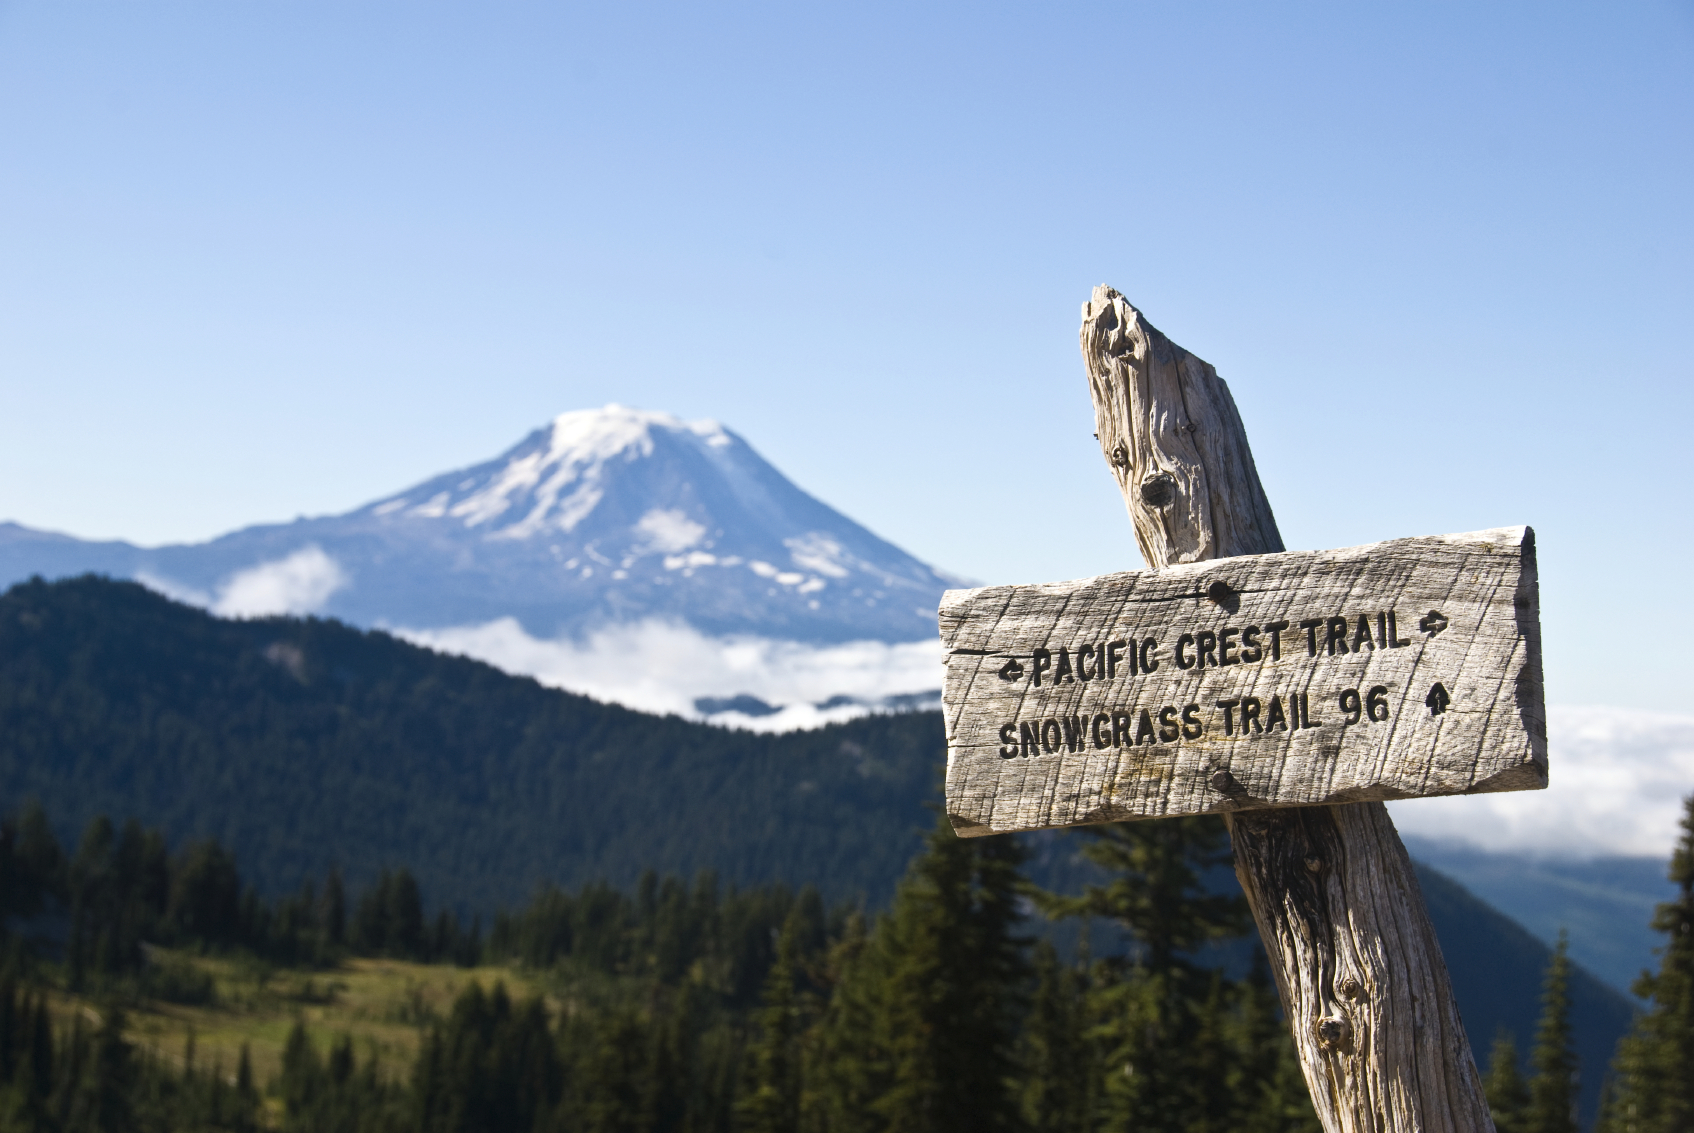 trail-sign-pacific-crest-trail-mountain-view-mirror